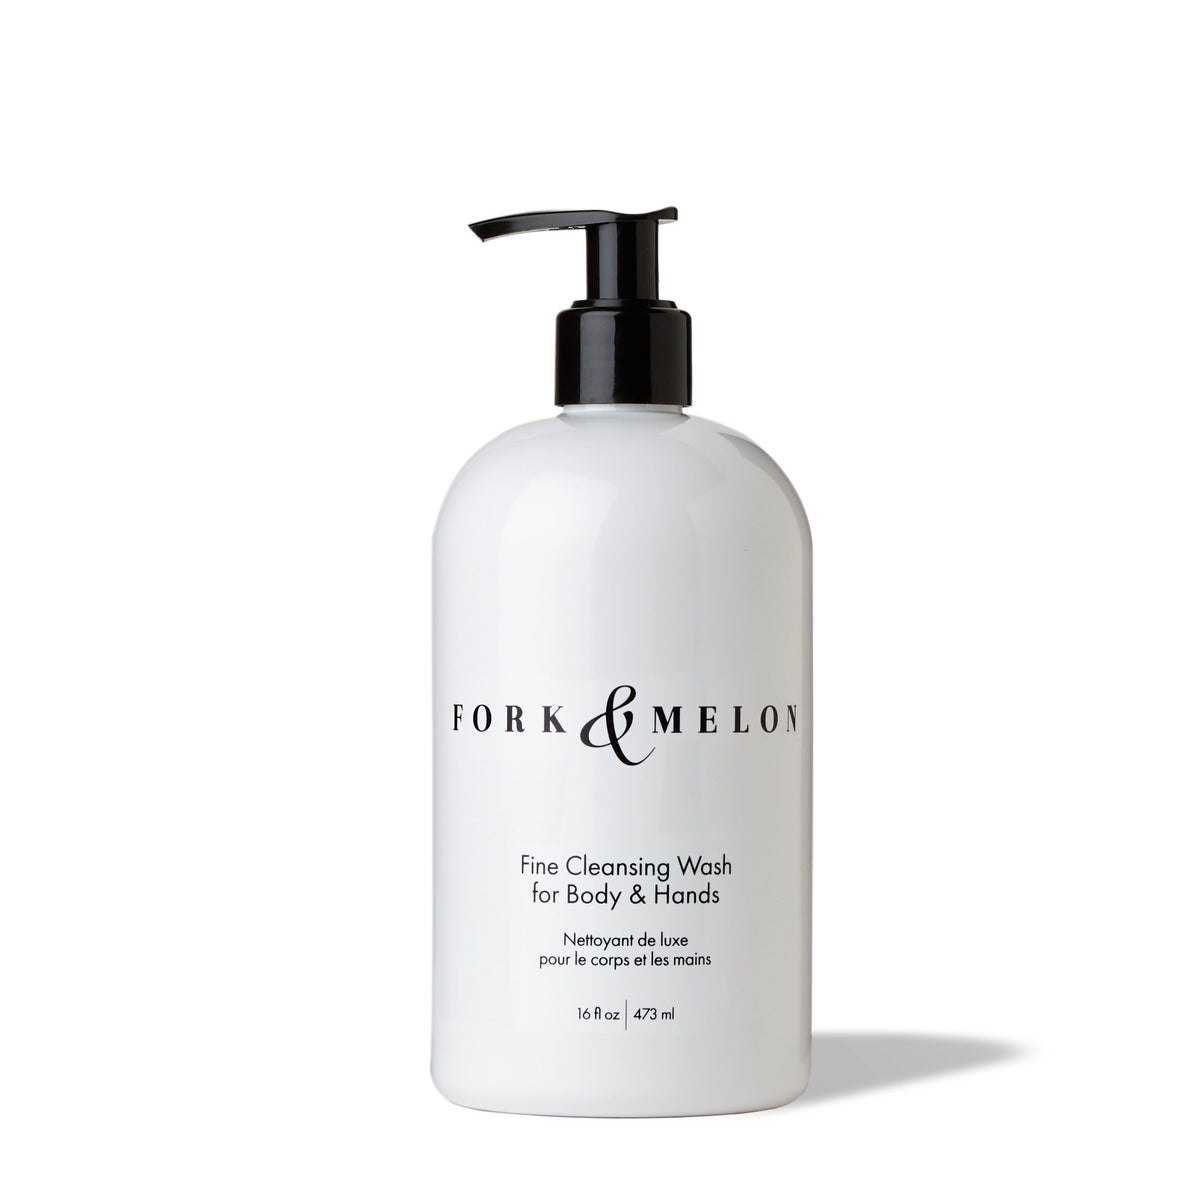 Fine Cleansing Wash for Body & Hands (16oz)